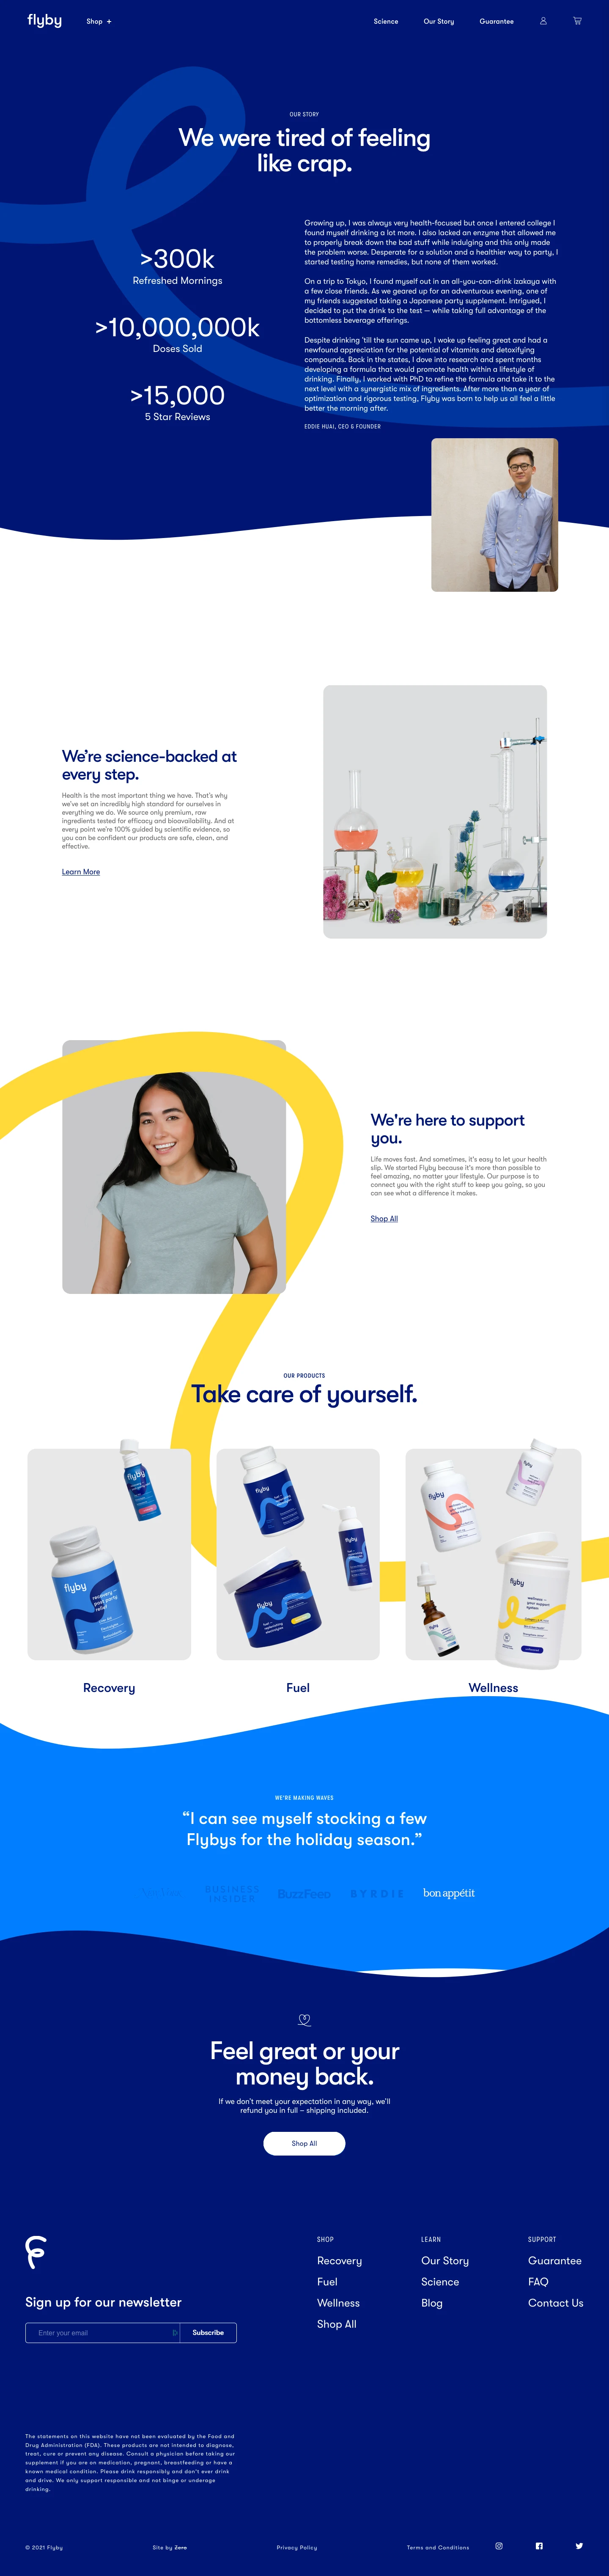 Flyby Landing Page Example: Science-backed, effective wellness aids to help you feel good, and do more. We put in exhaustive research and testing into all of our formulas to make sure they’re safe and effective.